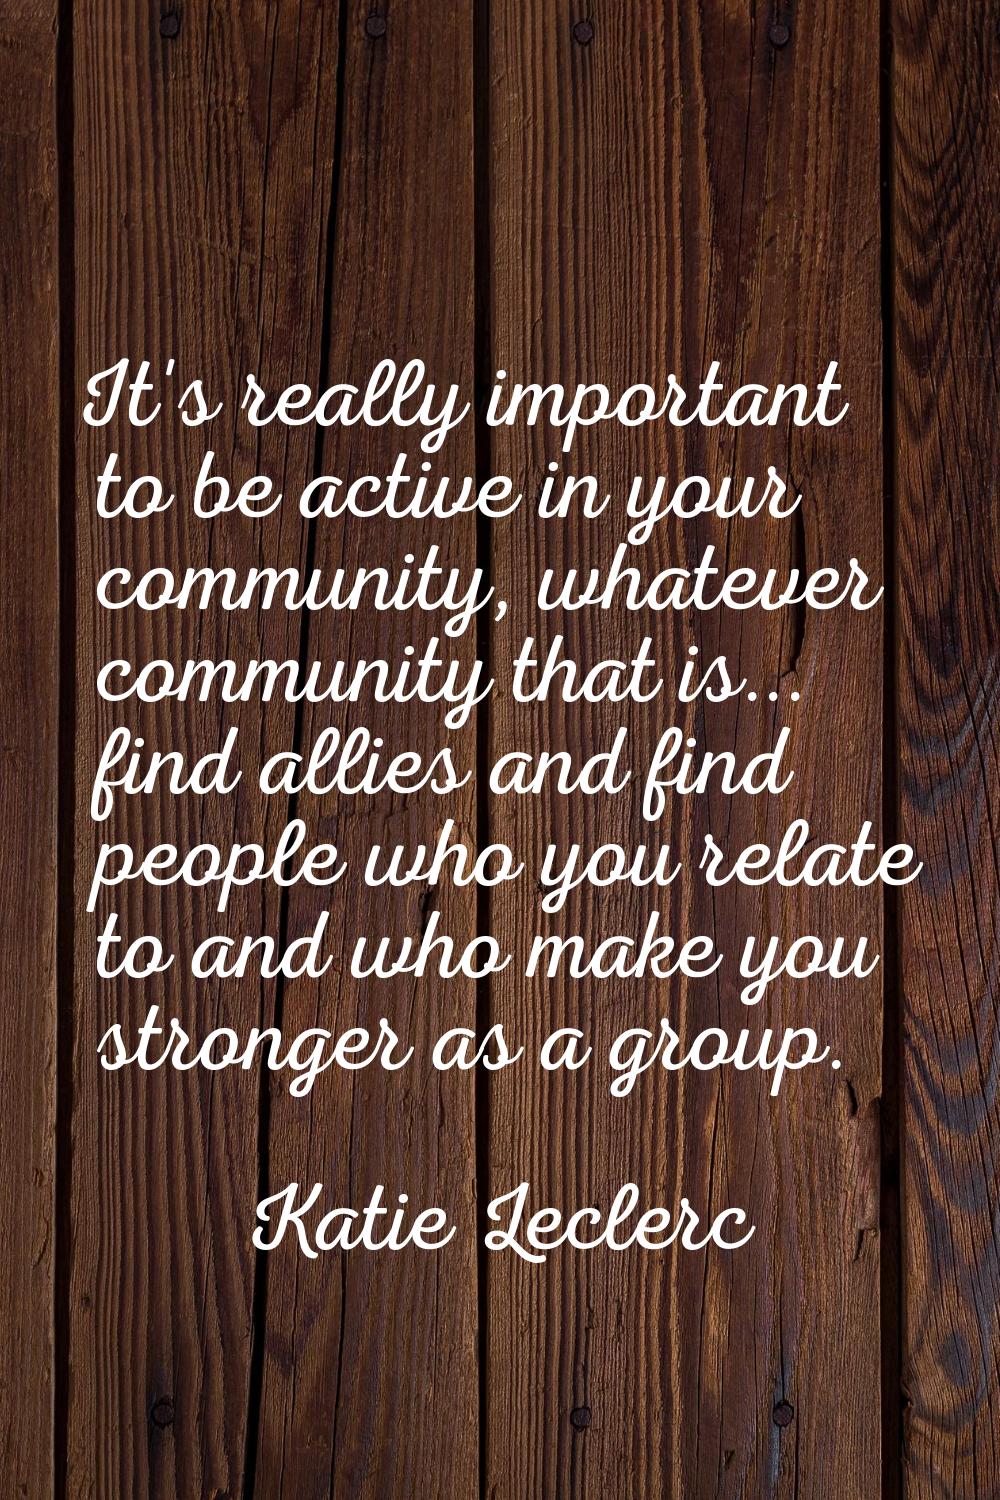 It's really important to be active in your community, whatever community that is... find allies and